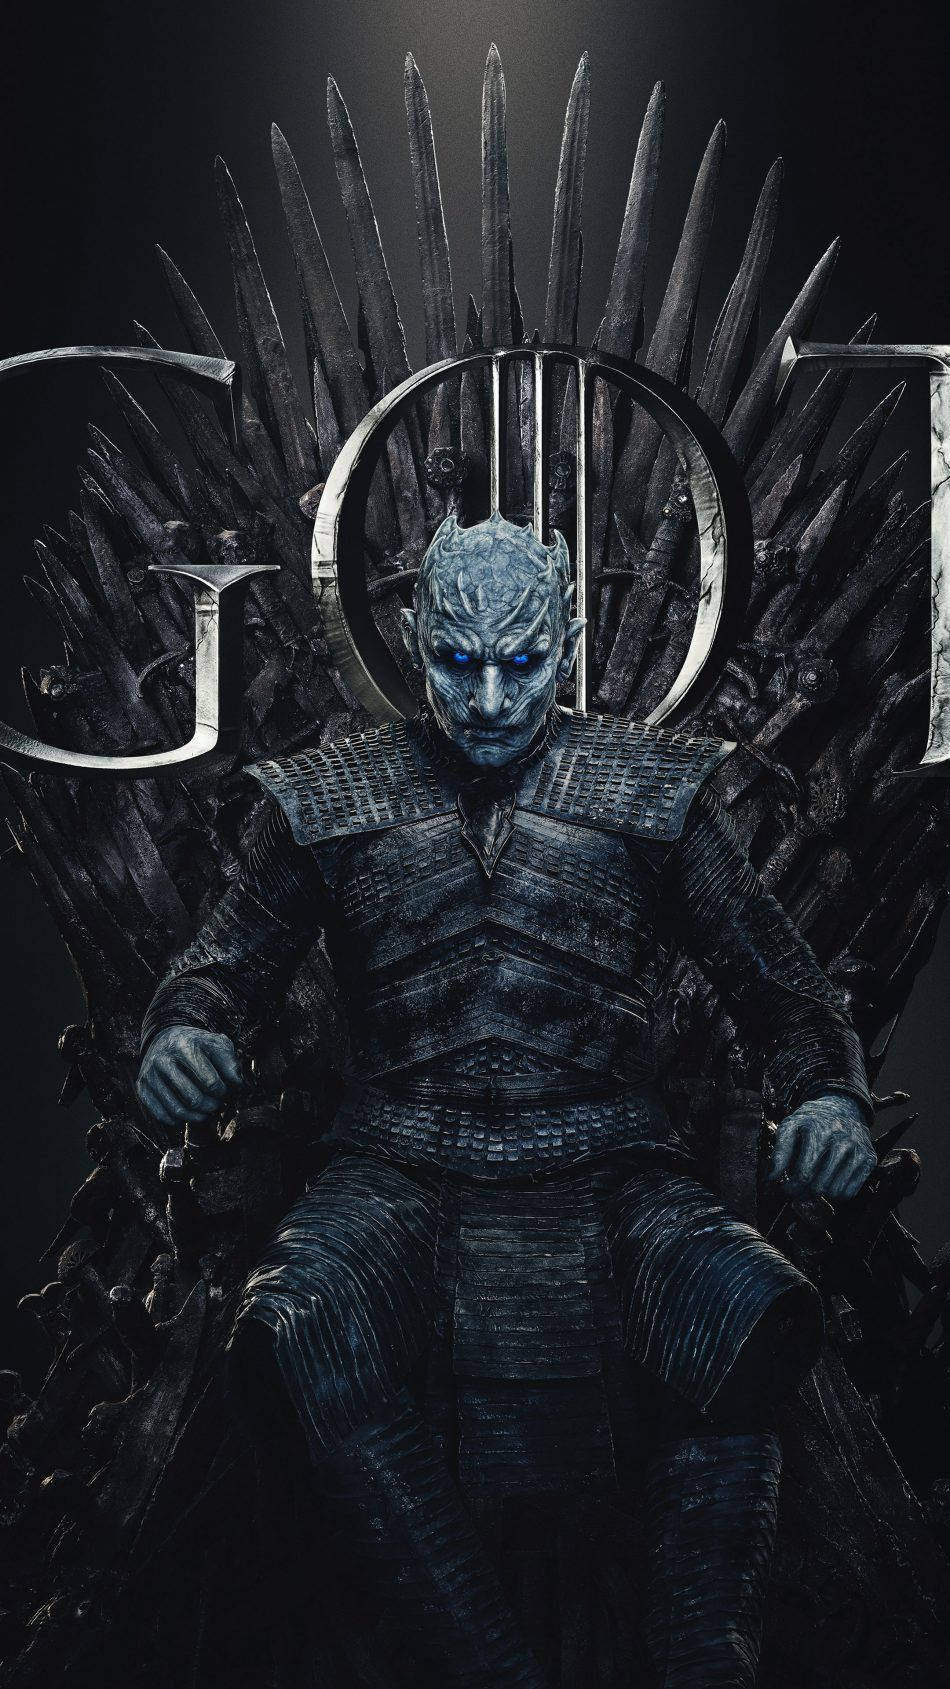 "Game of Thrones Season 8 Night Throne: A Dark and Mysterious Take on the Iron Throne" Wallpaper